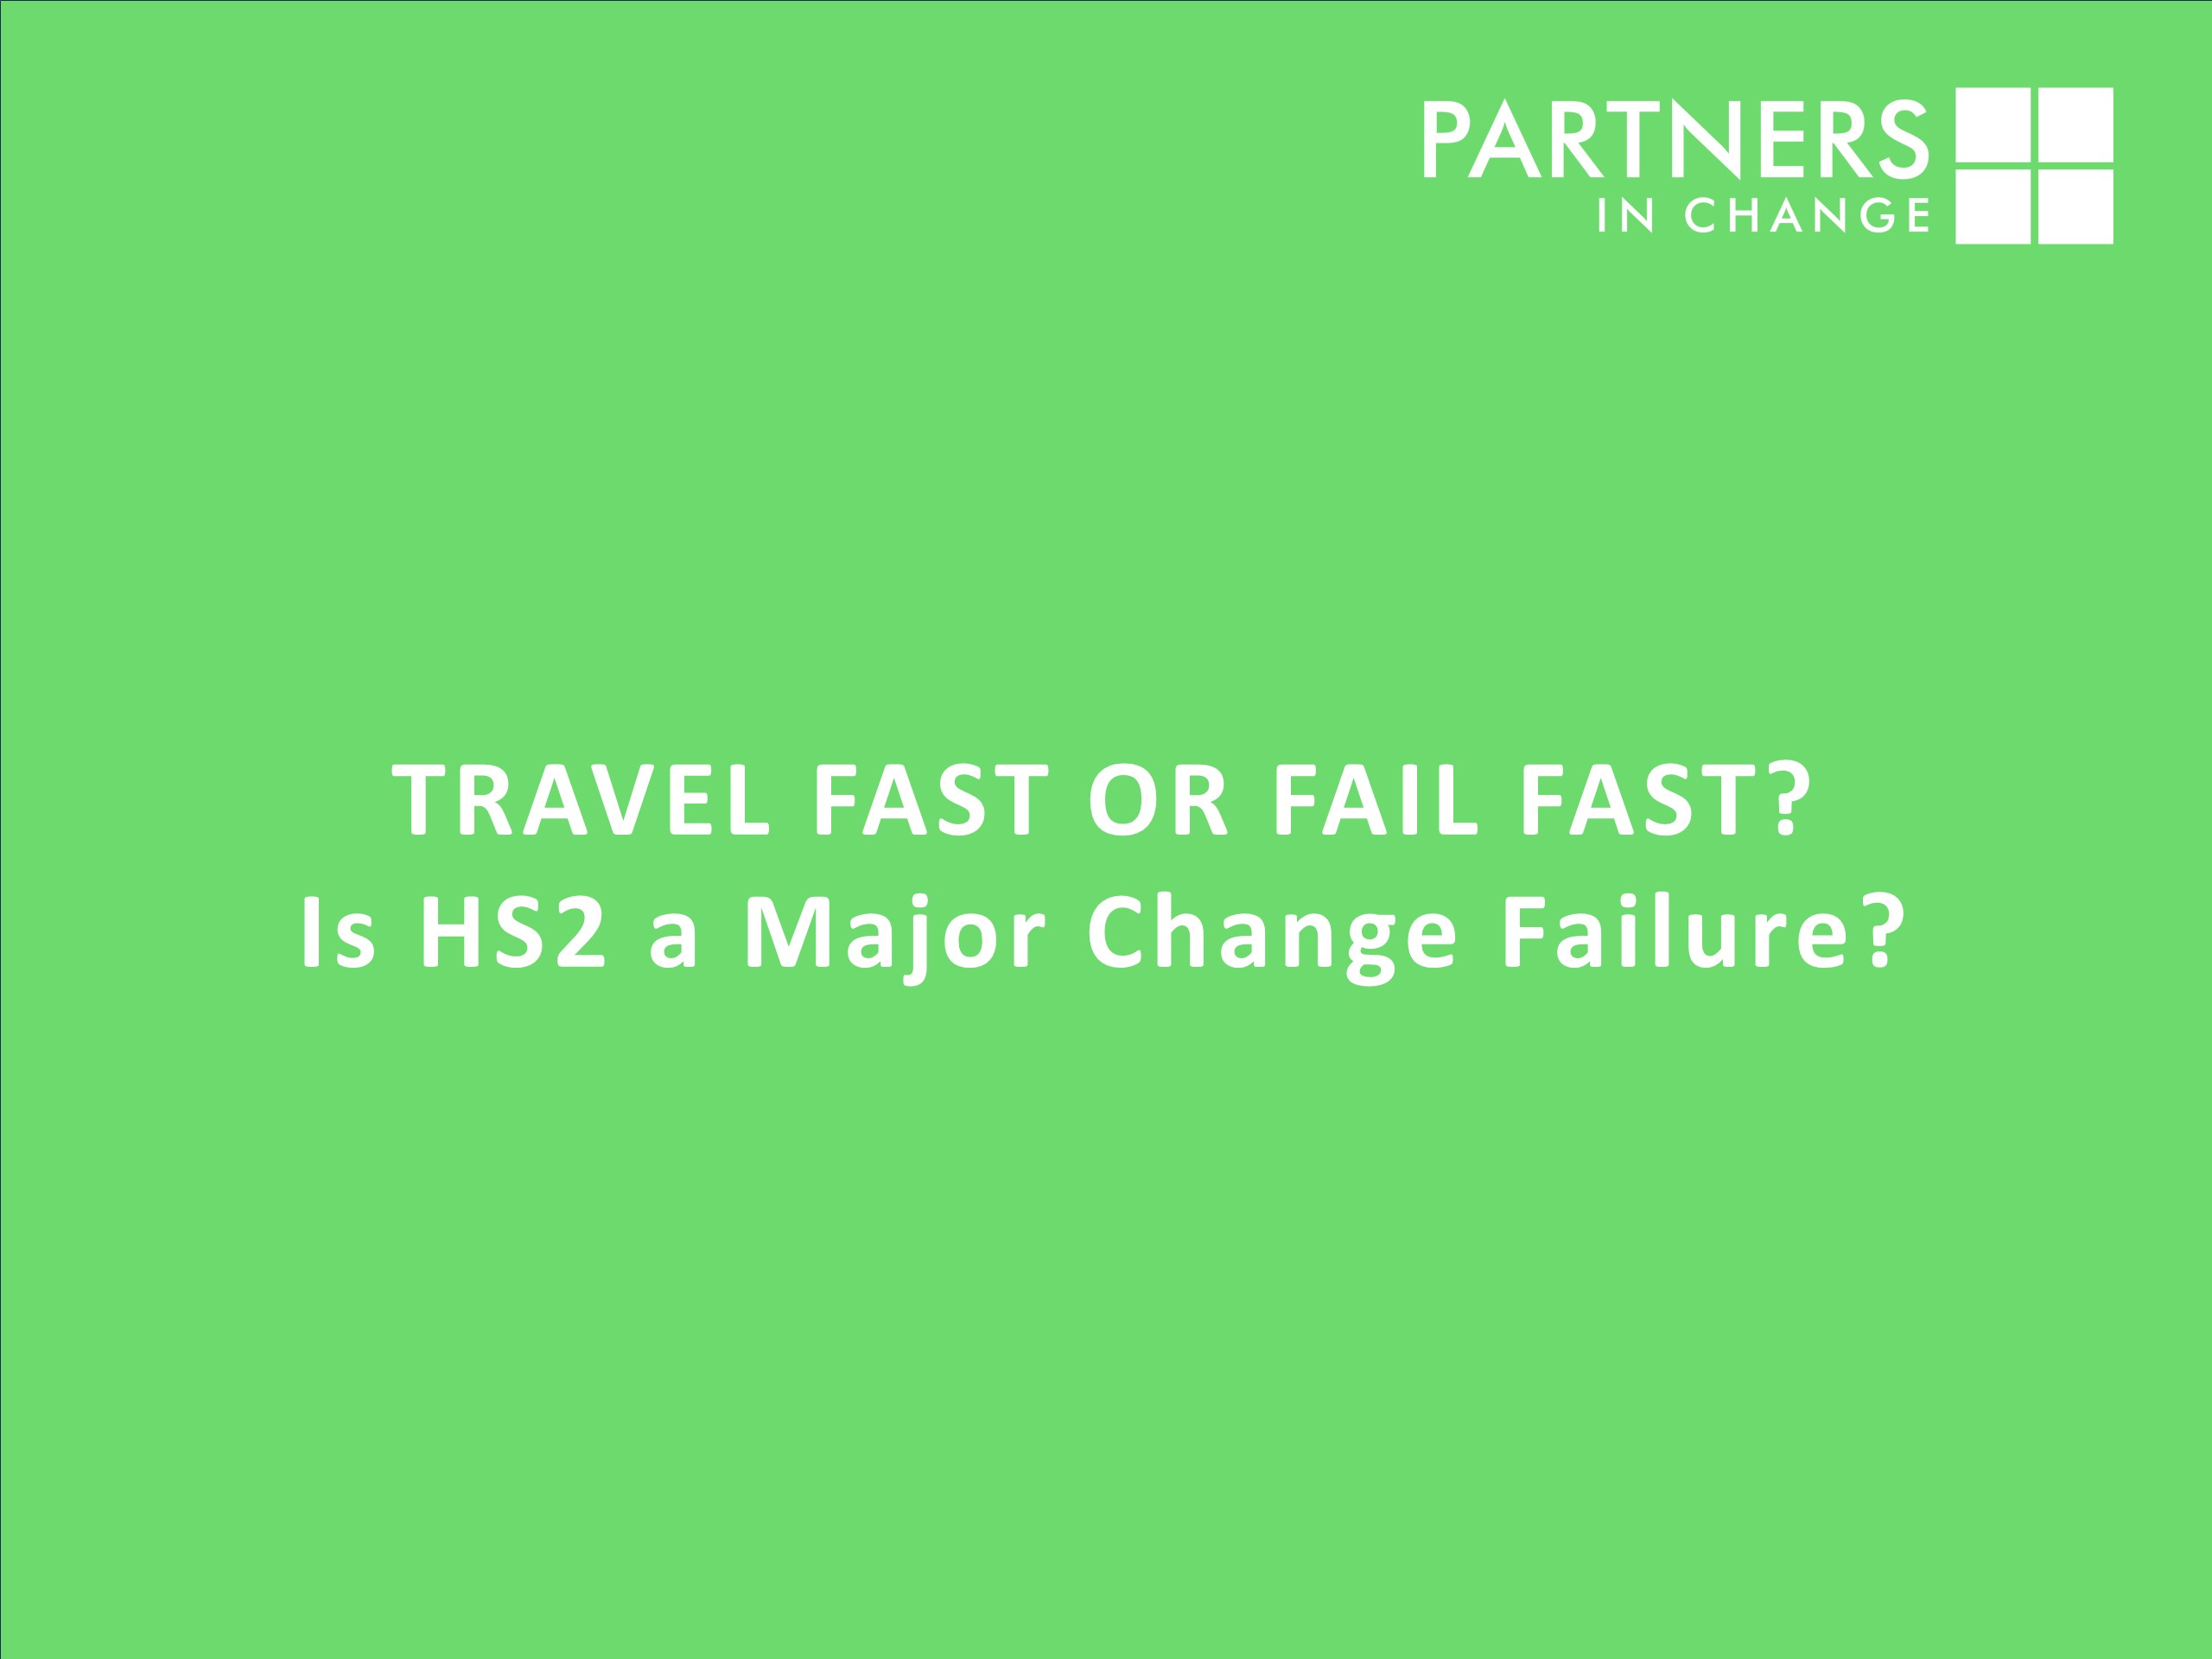 Travel faster or fail fast? Is HS2 a major change failure?